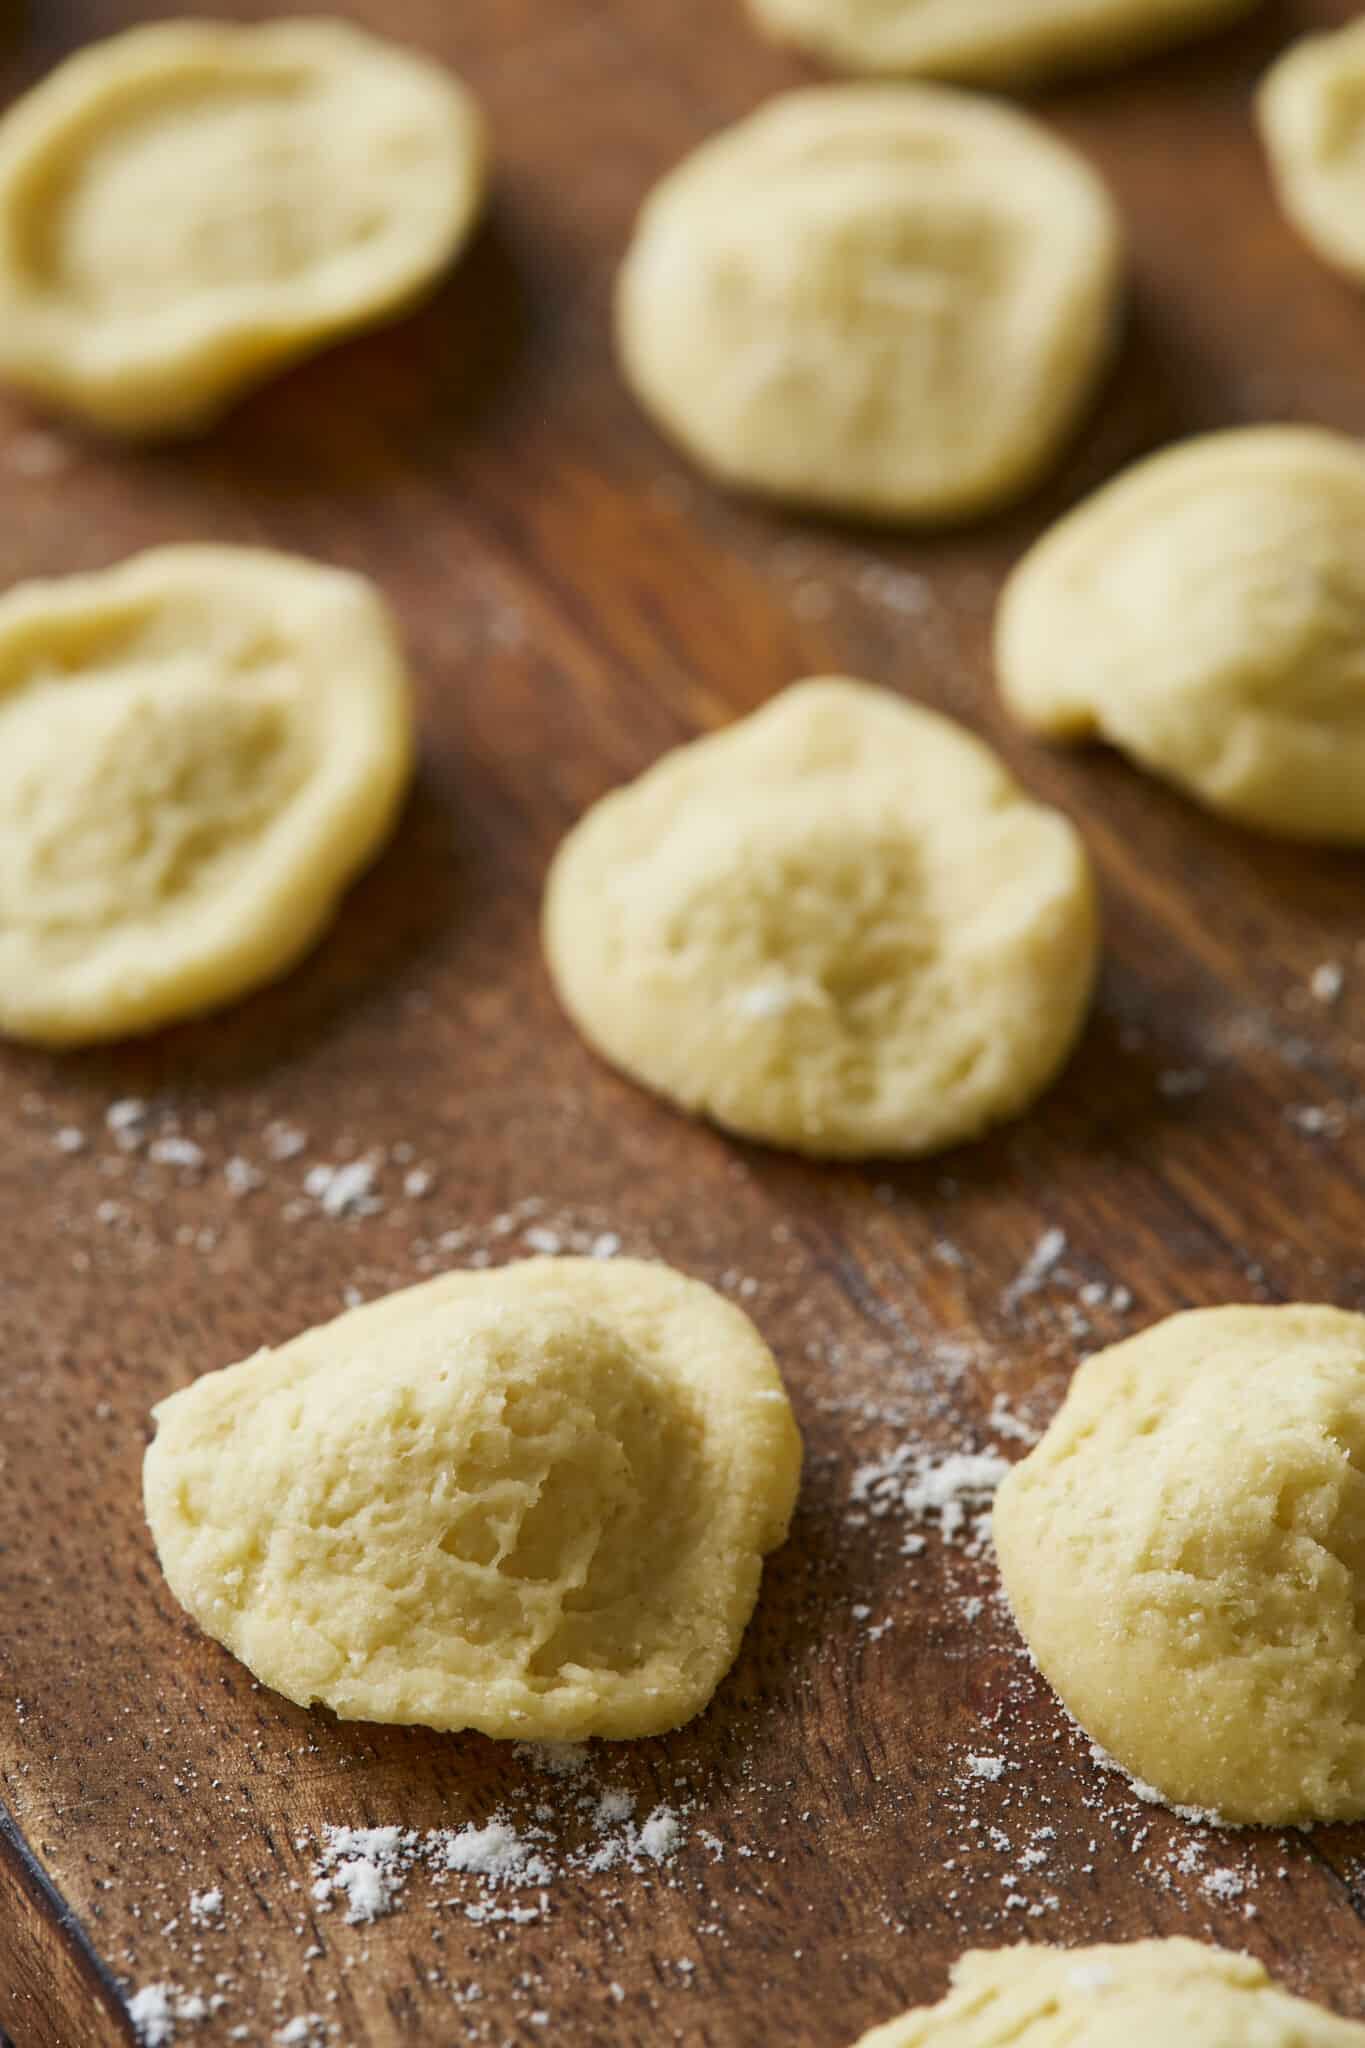 Freshly made Orecchiette Pasta is drying on a floured wooden board. This unique semolina pasta is small, round, and slightly domed with an indented center, resembling tears and making it great for capturing the various toppings and condiments.